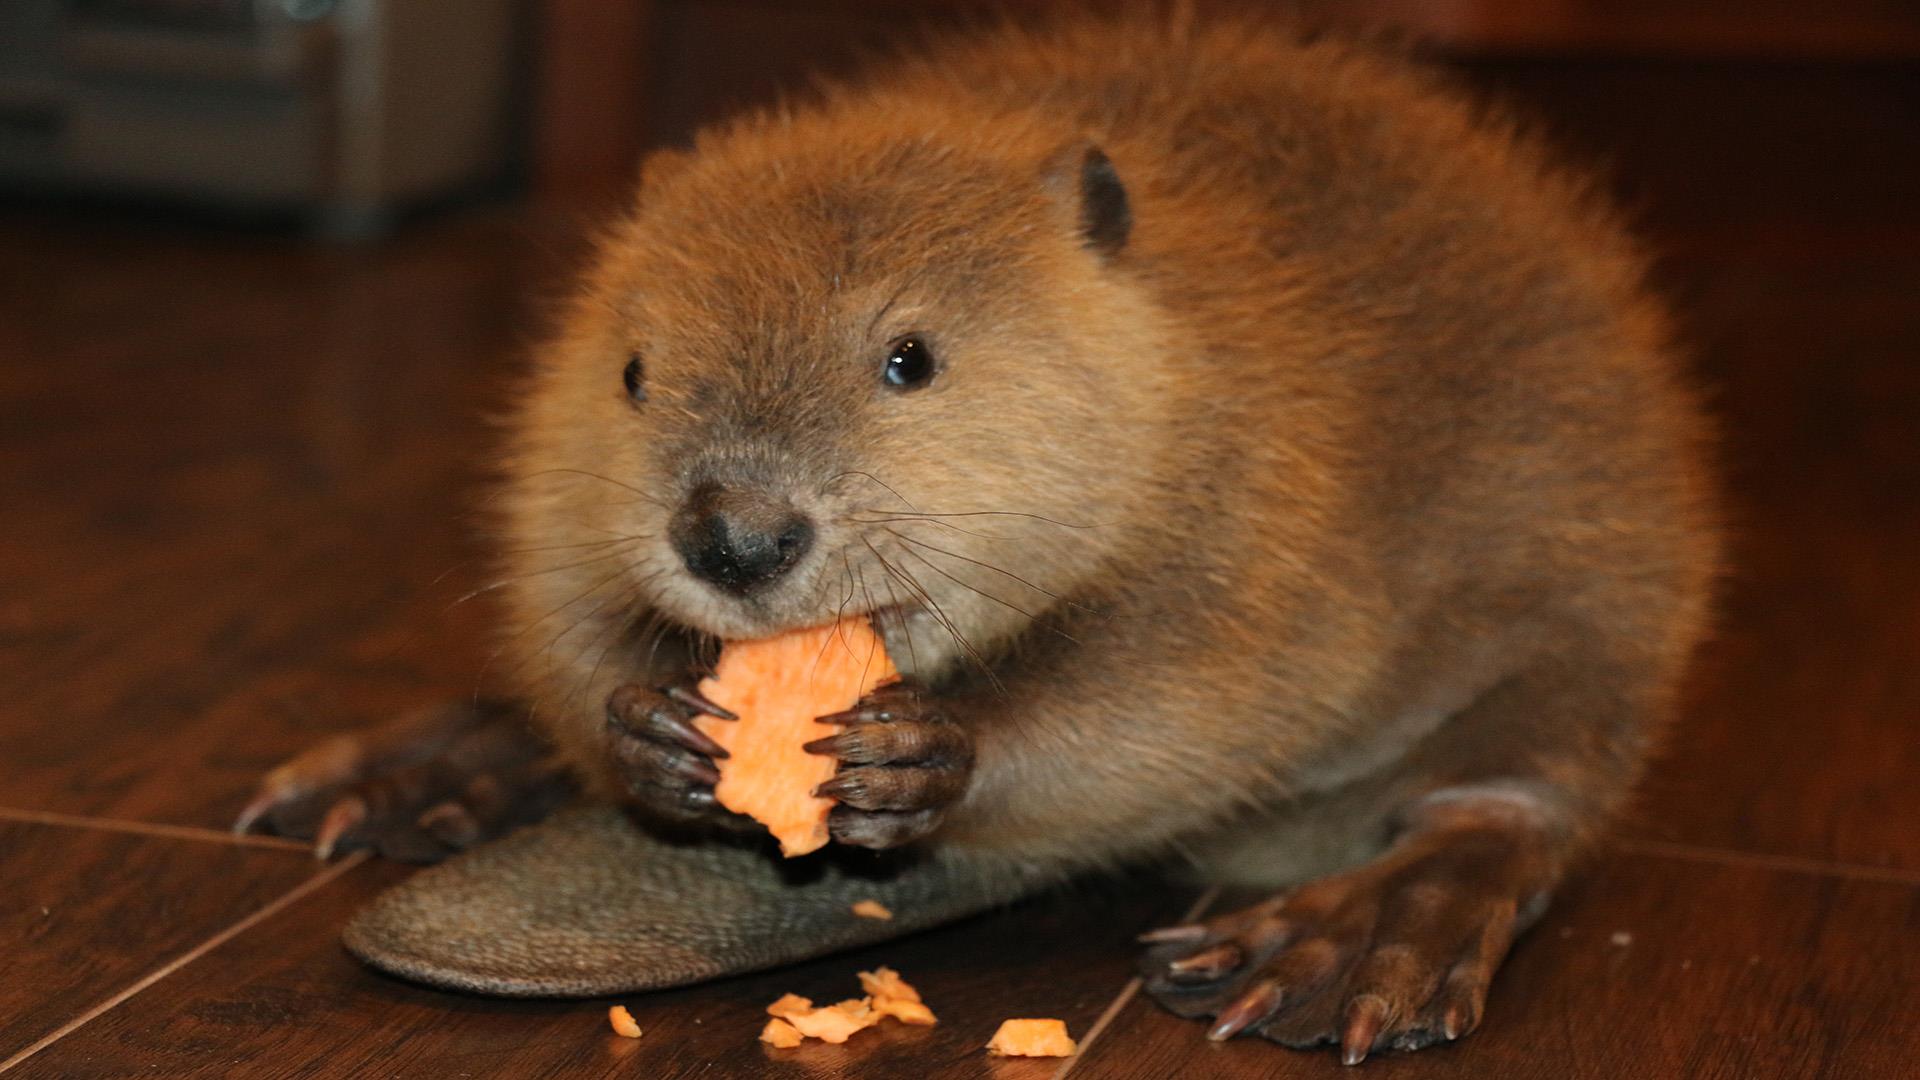 Justin Beaver, rescued as an orphan, makes dams out of toys